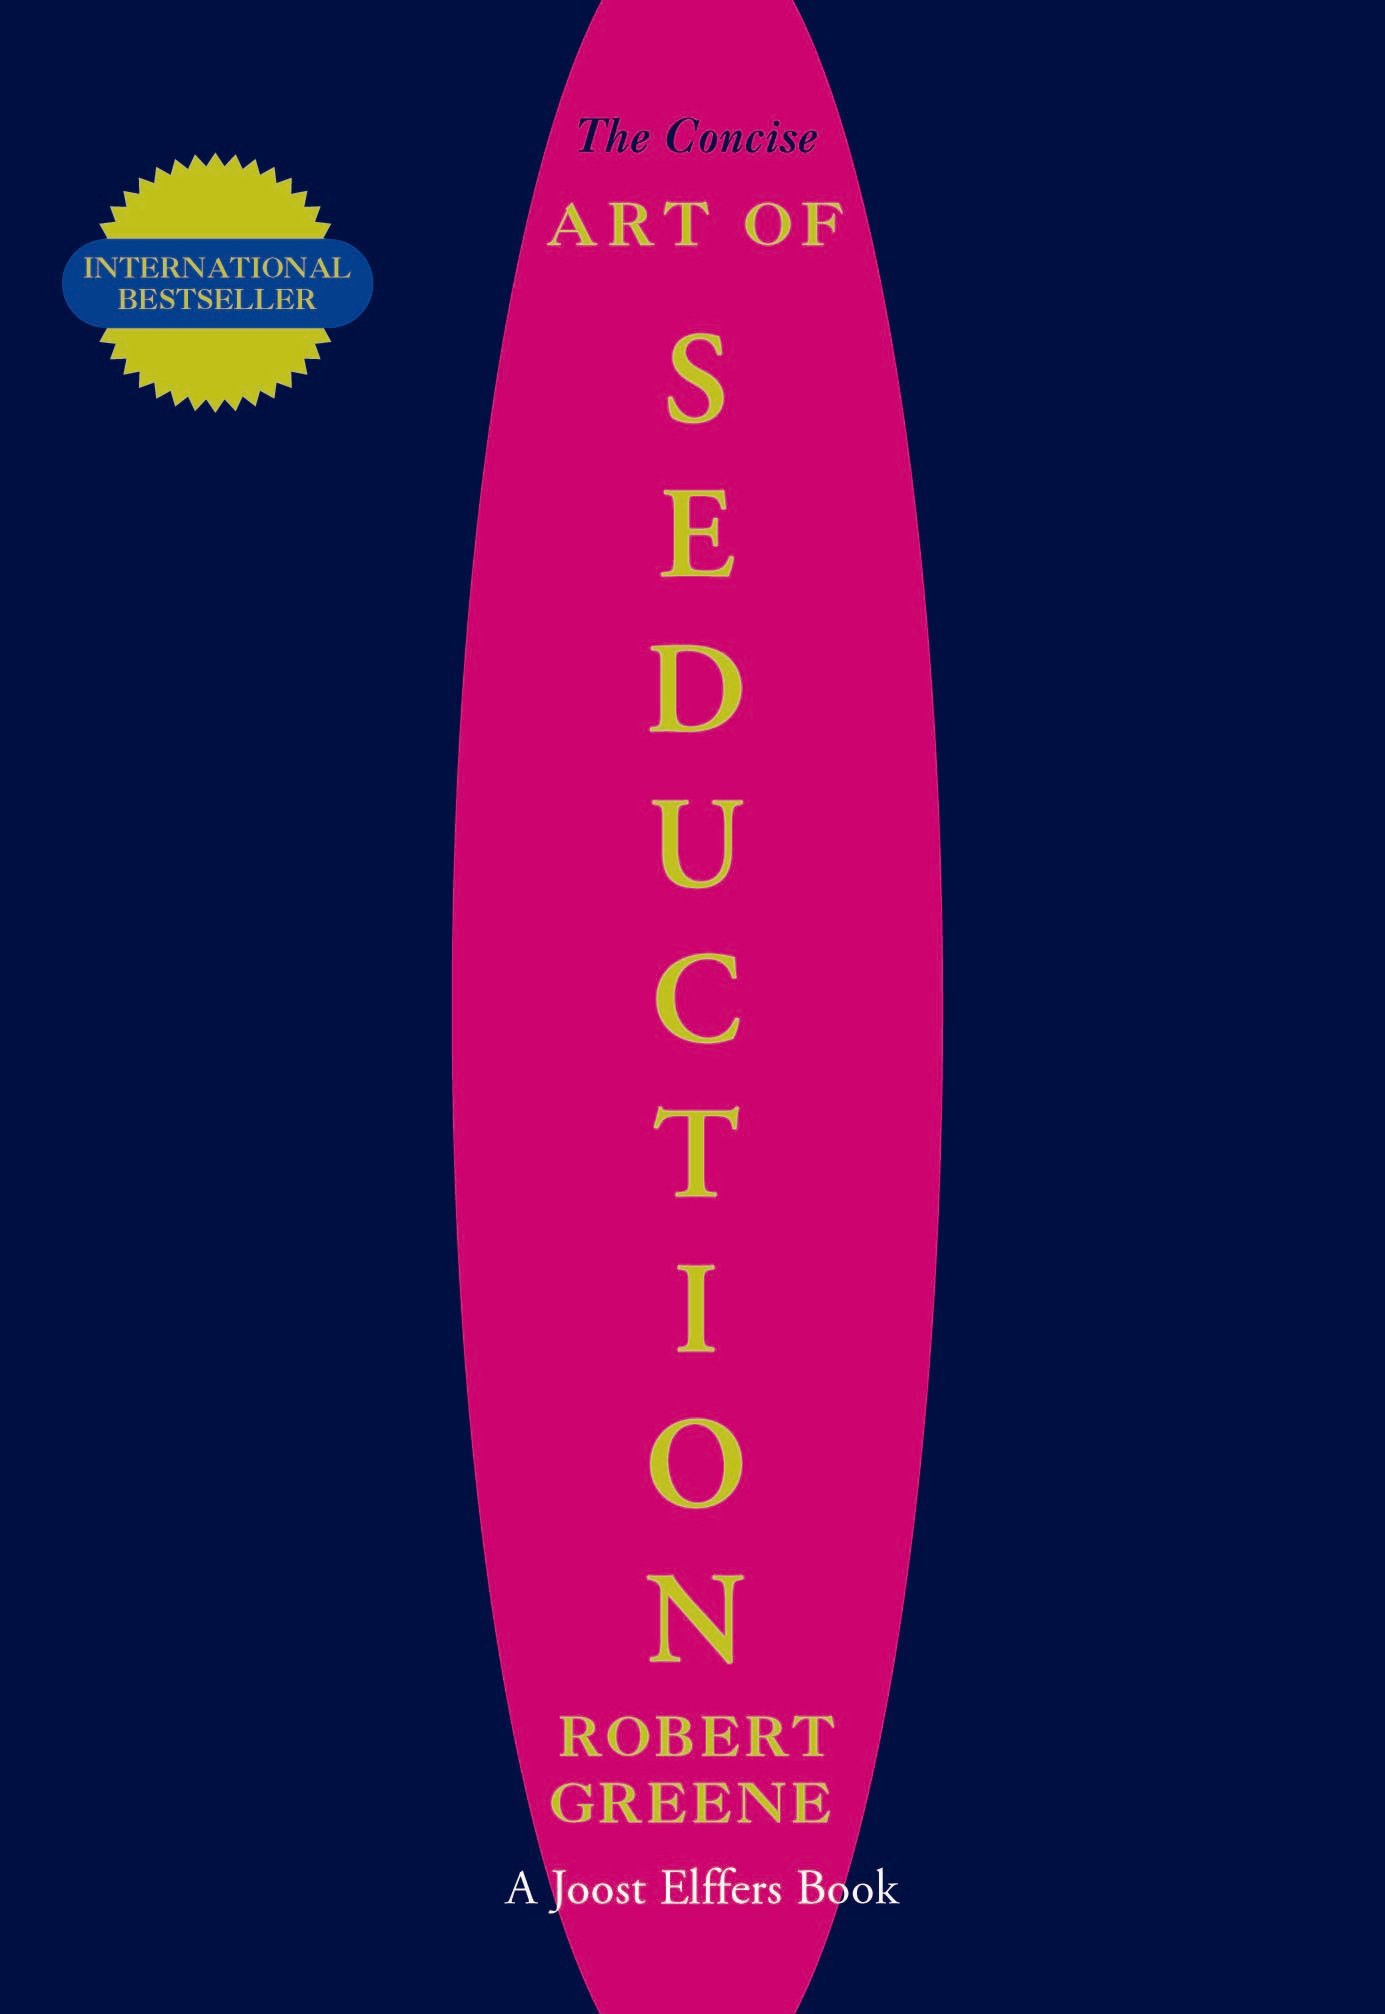 The Art of Seduction audiobook: a bold and ingenious manual